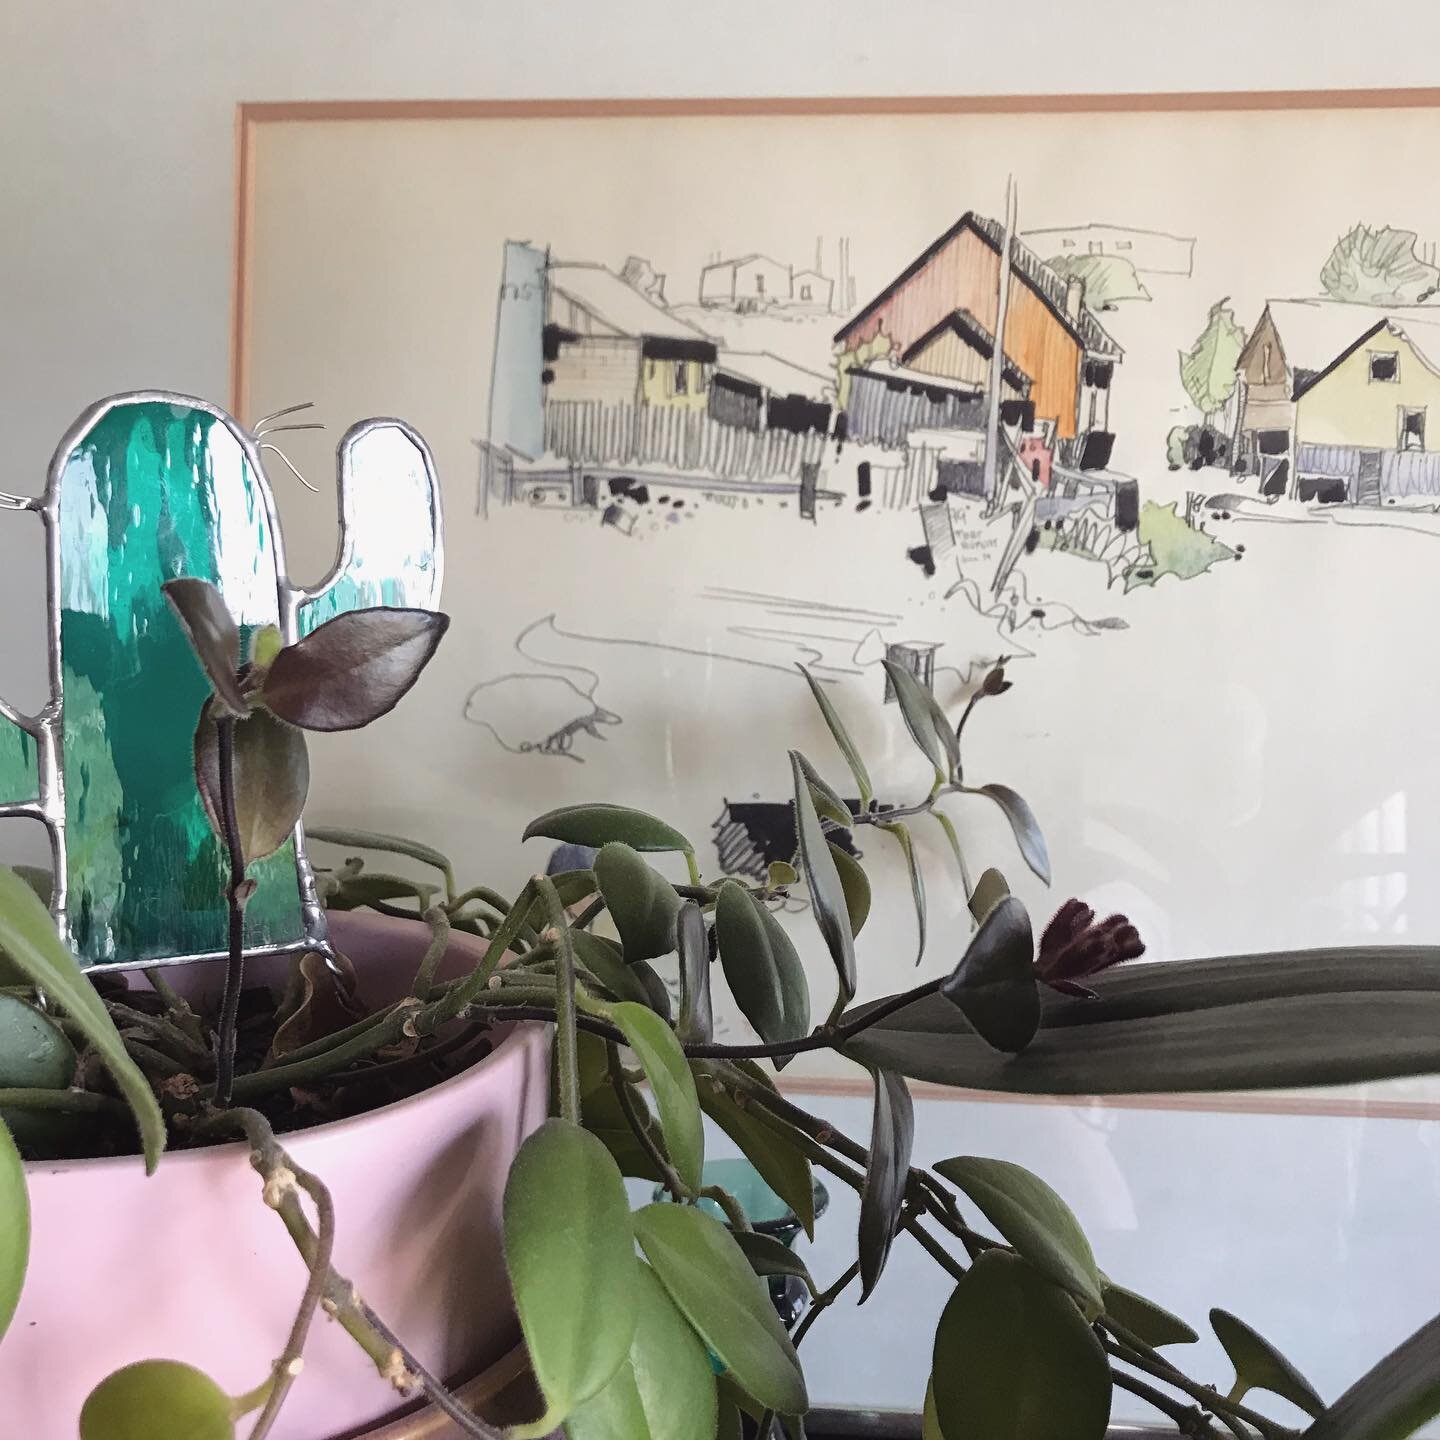 Always so happy when I find the perfect vintage find! I saw this vintage piece and was immediately drawn to it and had to have it! #vintageartwork 

Sourcing art (new AND pre-loved) for our clients is our jam!  Adding art to your home can really brin